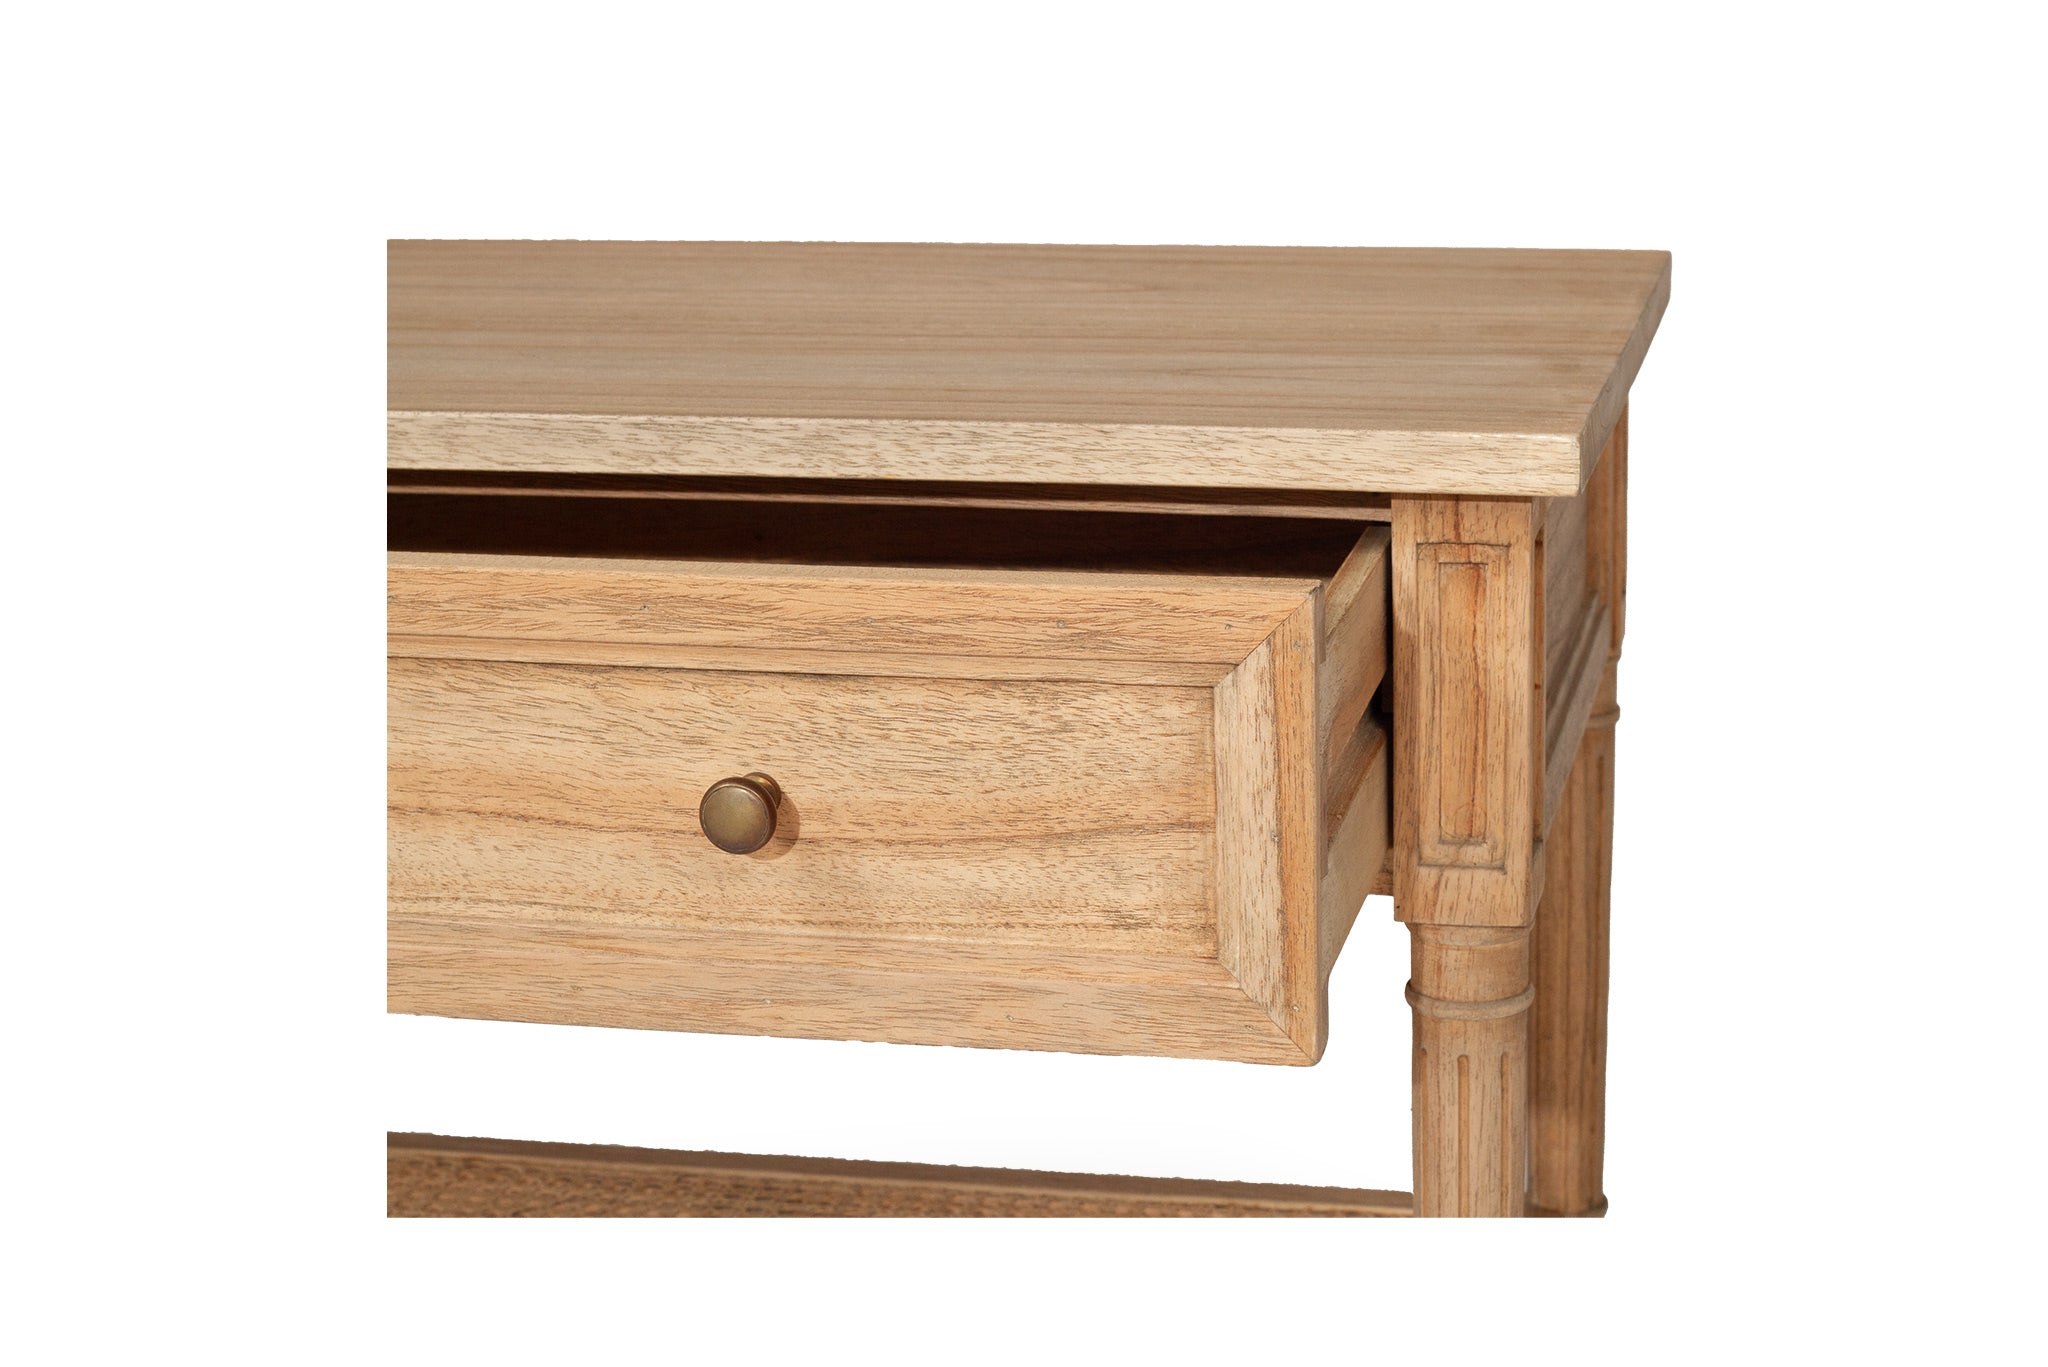 Vaucluse White Cedar & Cane Nightstand / Bedside Table 91cm – Weathered Oak